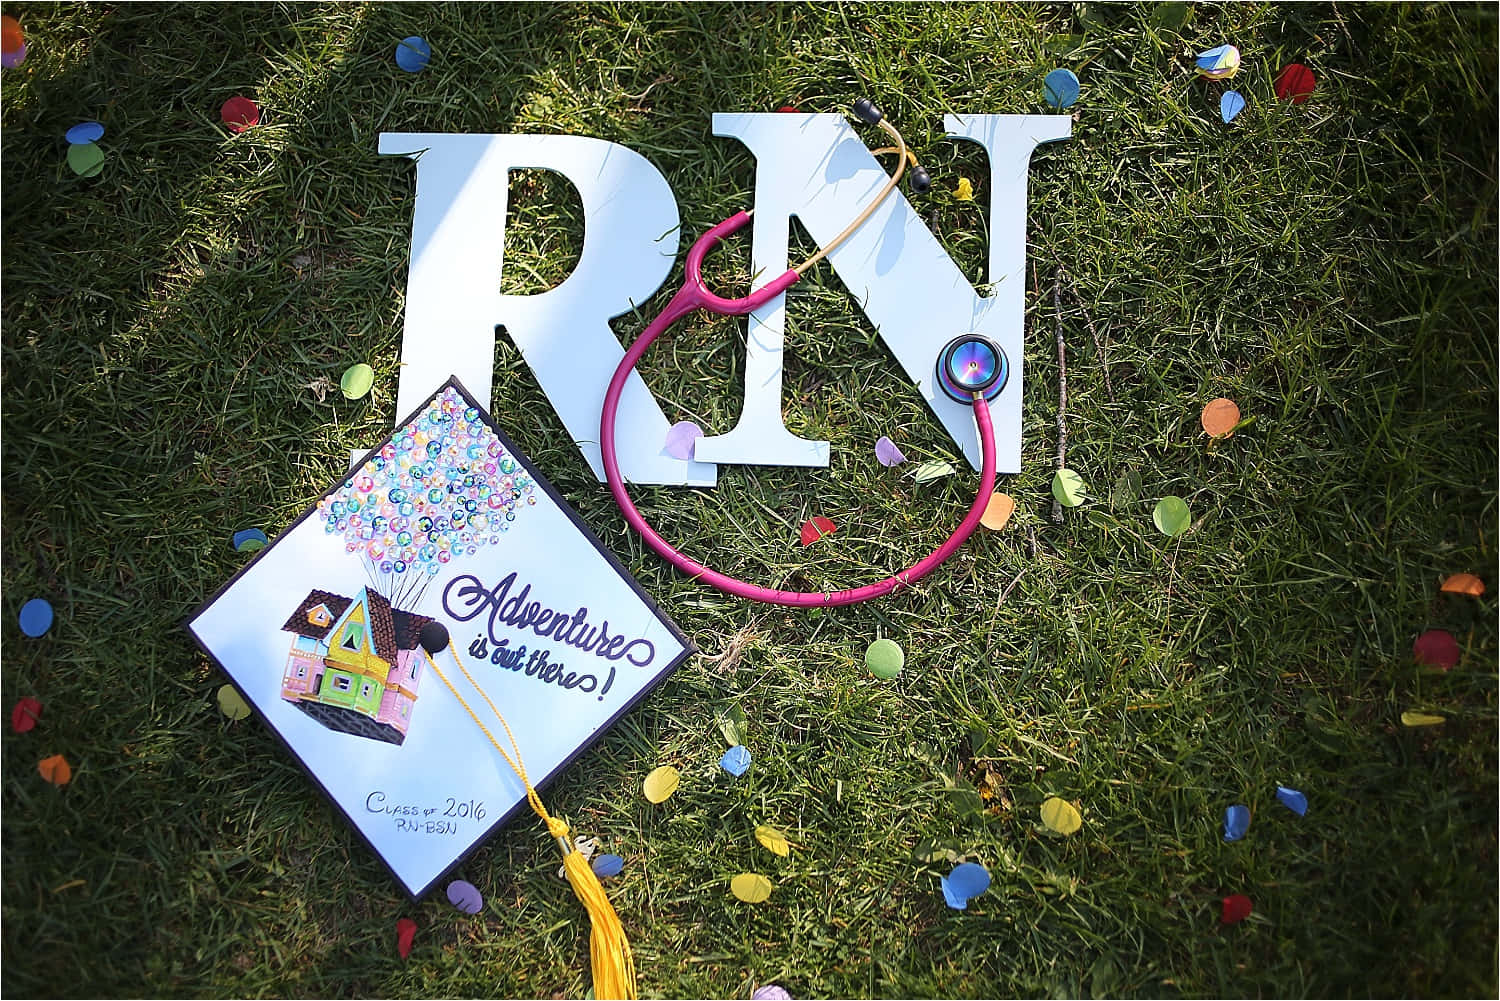 A Graduation Cap And A Stethoscope On The Grass